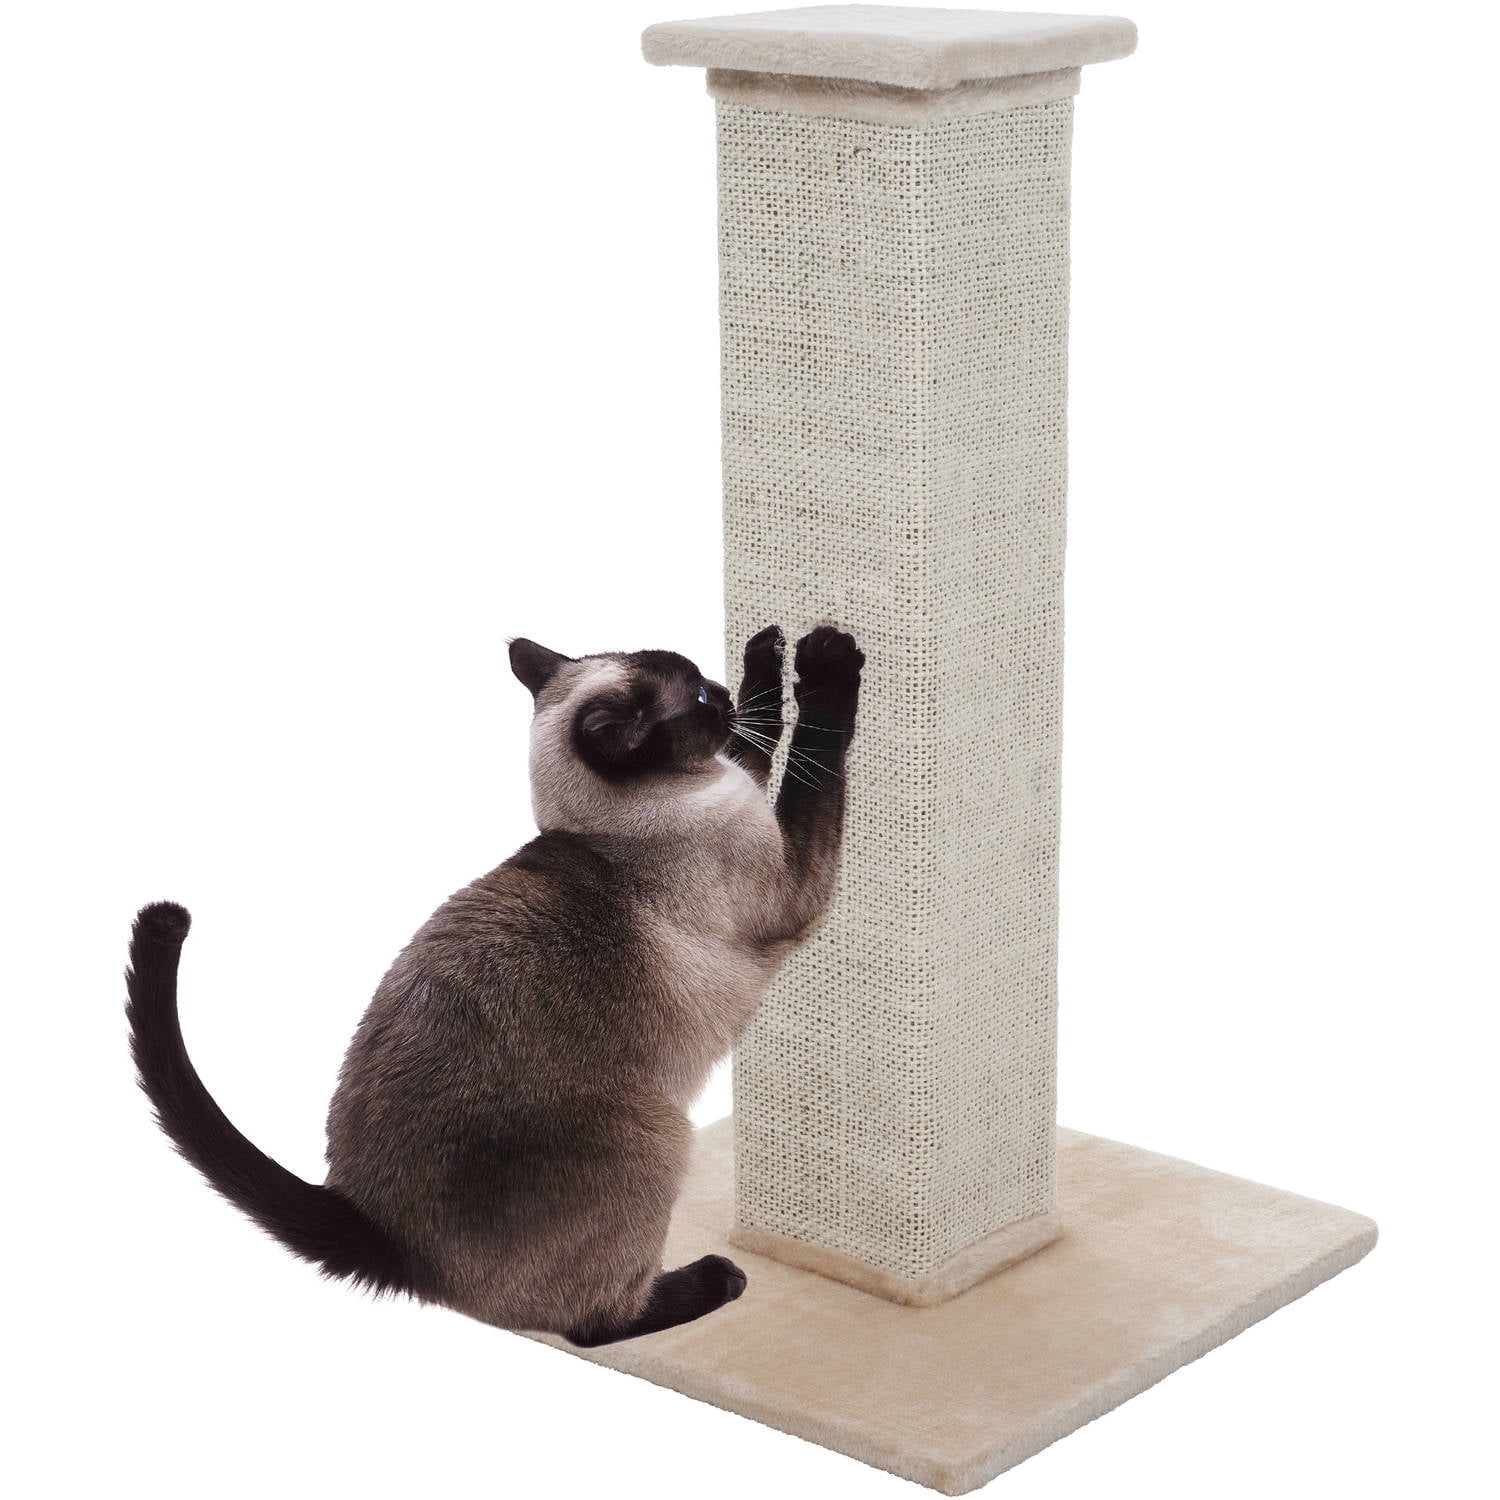 17 Cat Tree Small Cat Tower with Sisal & Plush Perch Cat Claw Scratcher for Indoor Large Cats Cat Scratcher with Hanging Toys rabbitgoo Cat Scratch Post Brown Kitten Climbing Pole for Play Rest